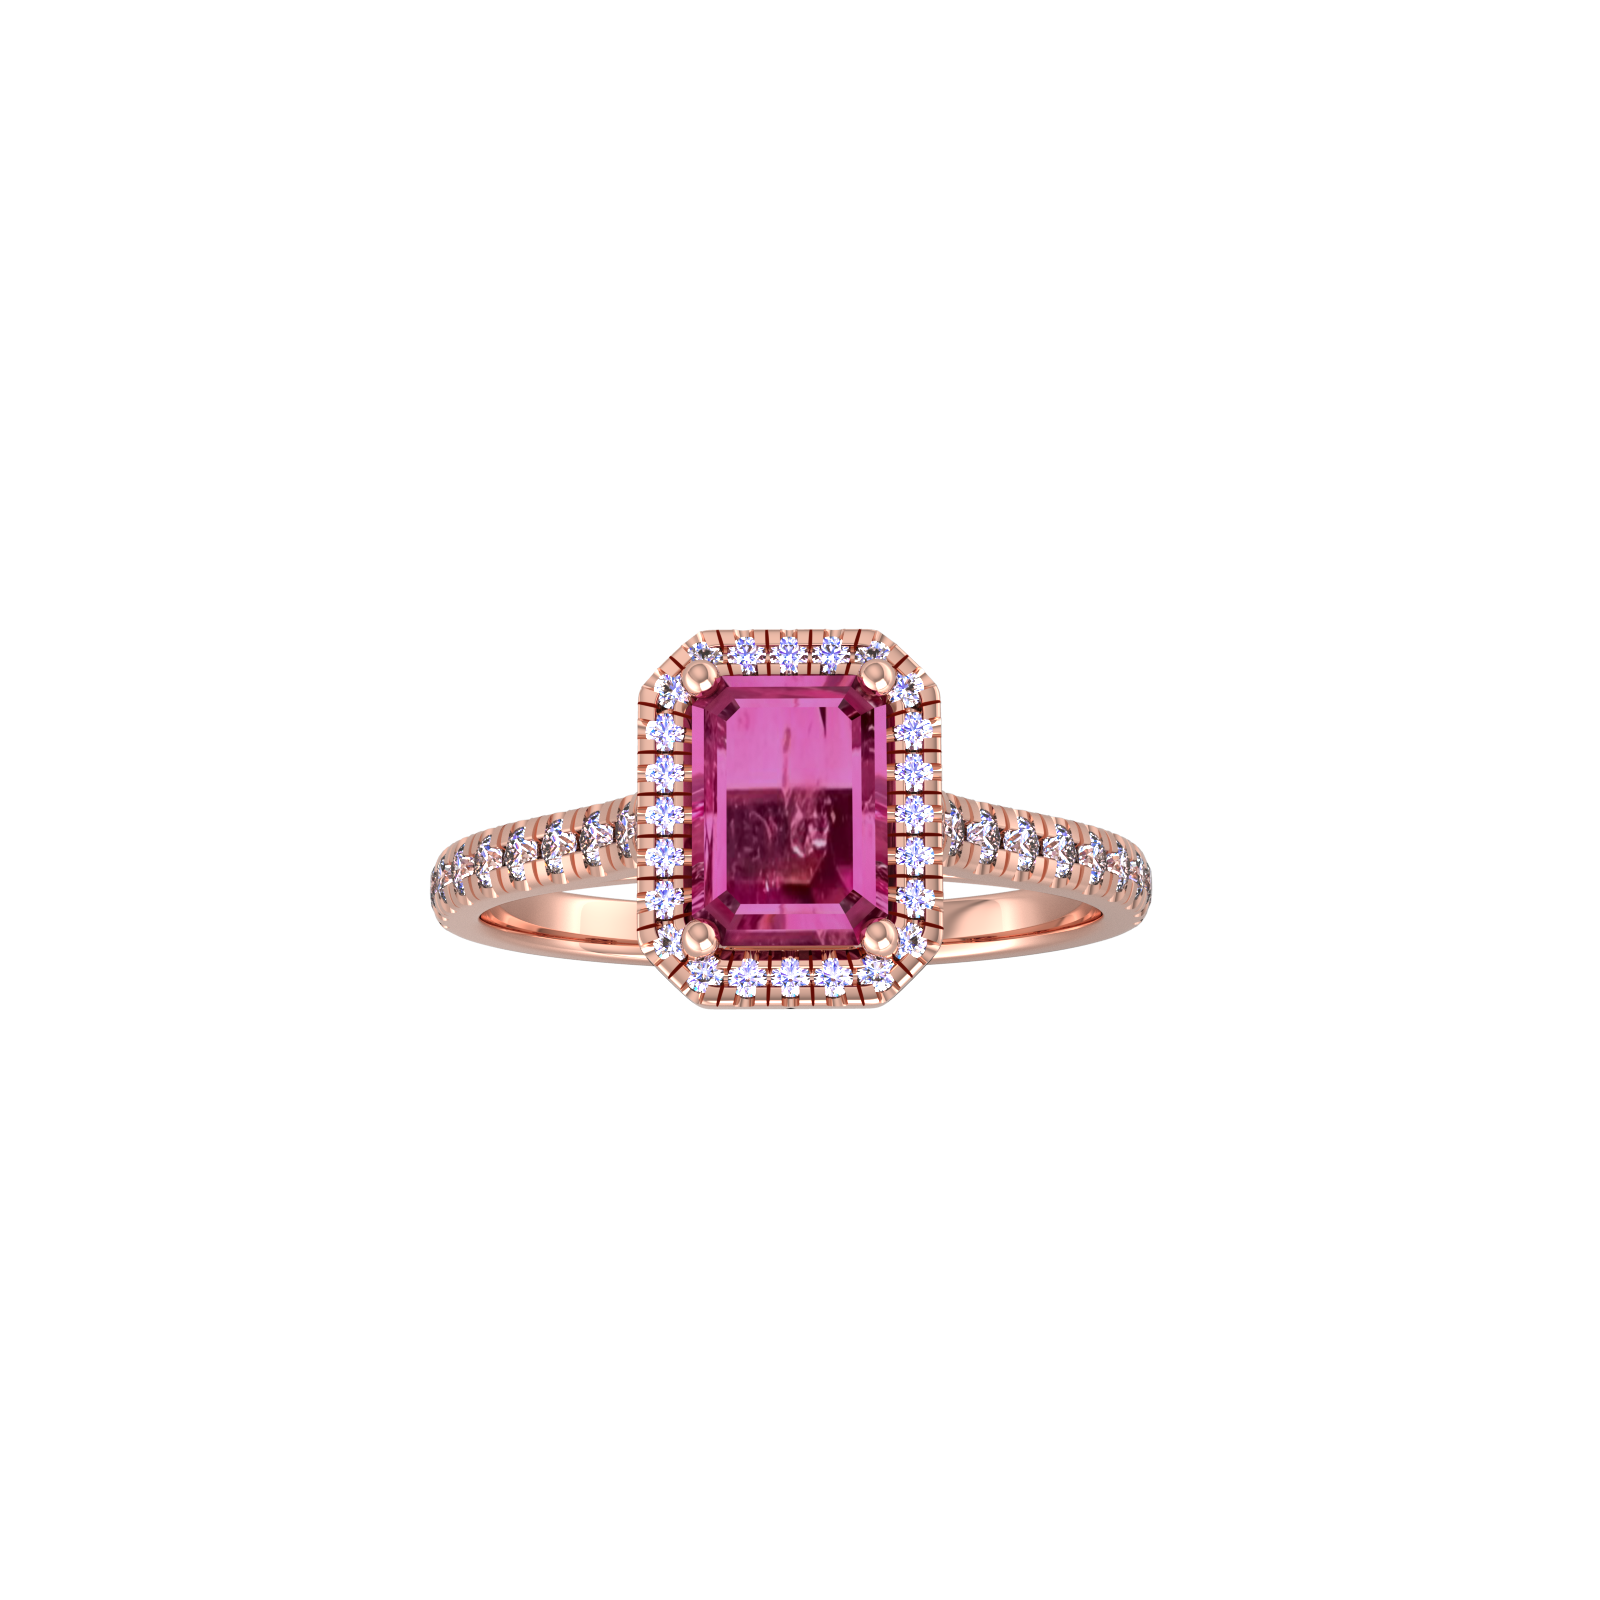 9ct Rose Gold Pink Tourmaline & Diamond Halo Ring with Diamond Shoulders - Ring Size F.5